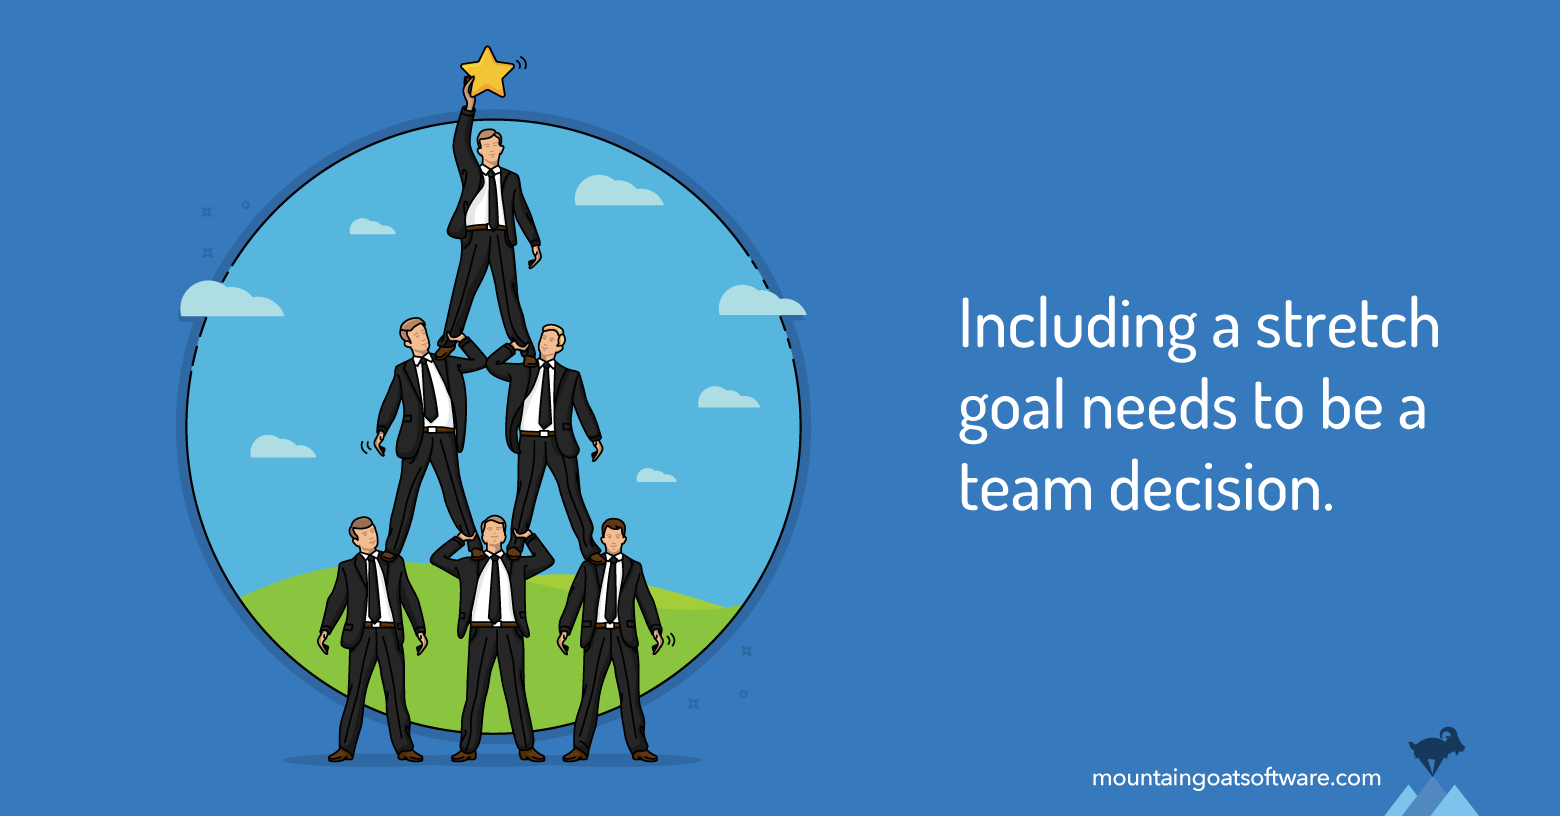 Should Scrum Teams Include a Stretch Goal In Their Sprints?